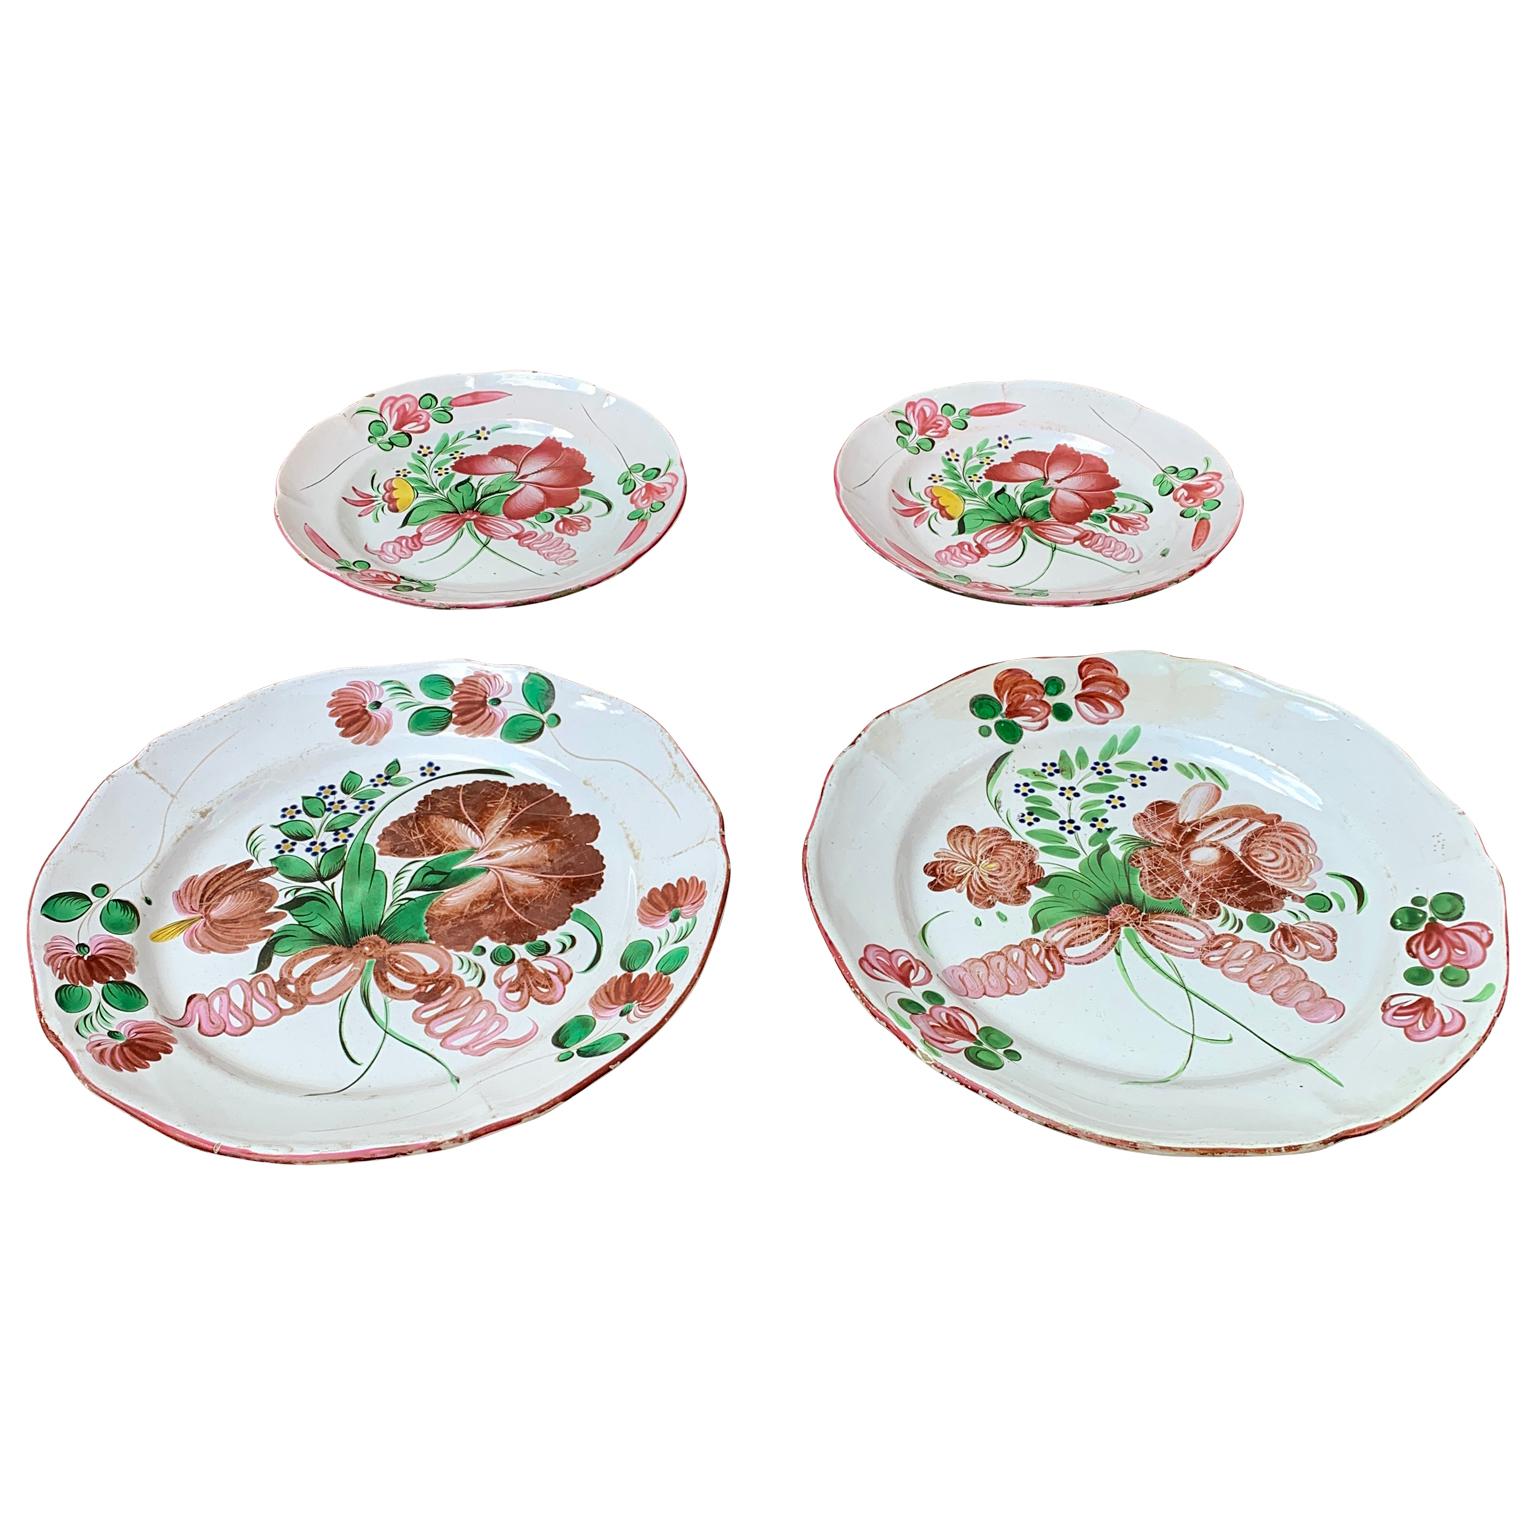 Two large French Faience dishes and two smaller from the city of Strasbourg in hand painted floral decoration. They are approximately from around 1800. The diameter of the largest pair is 30 cm.



 